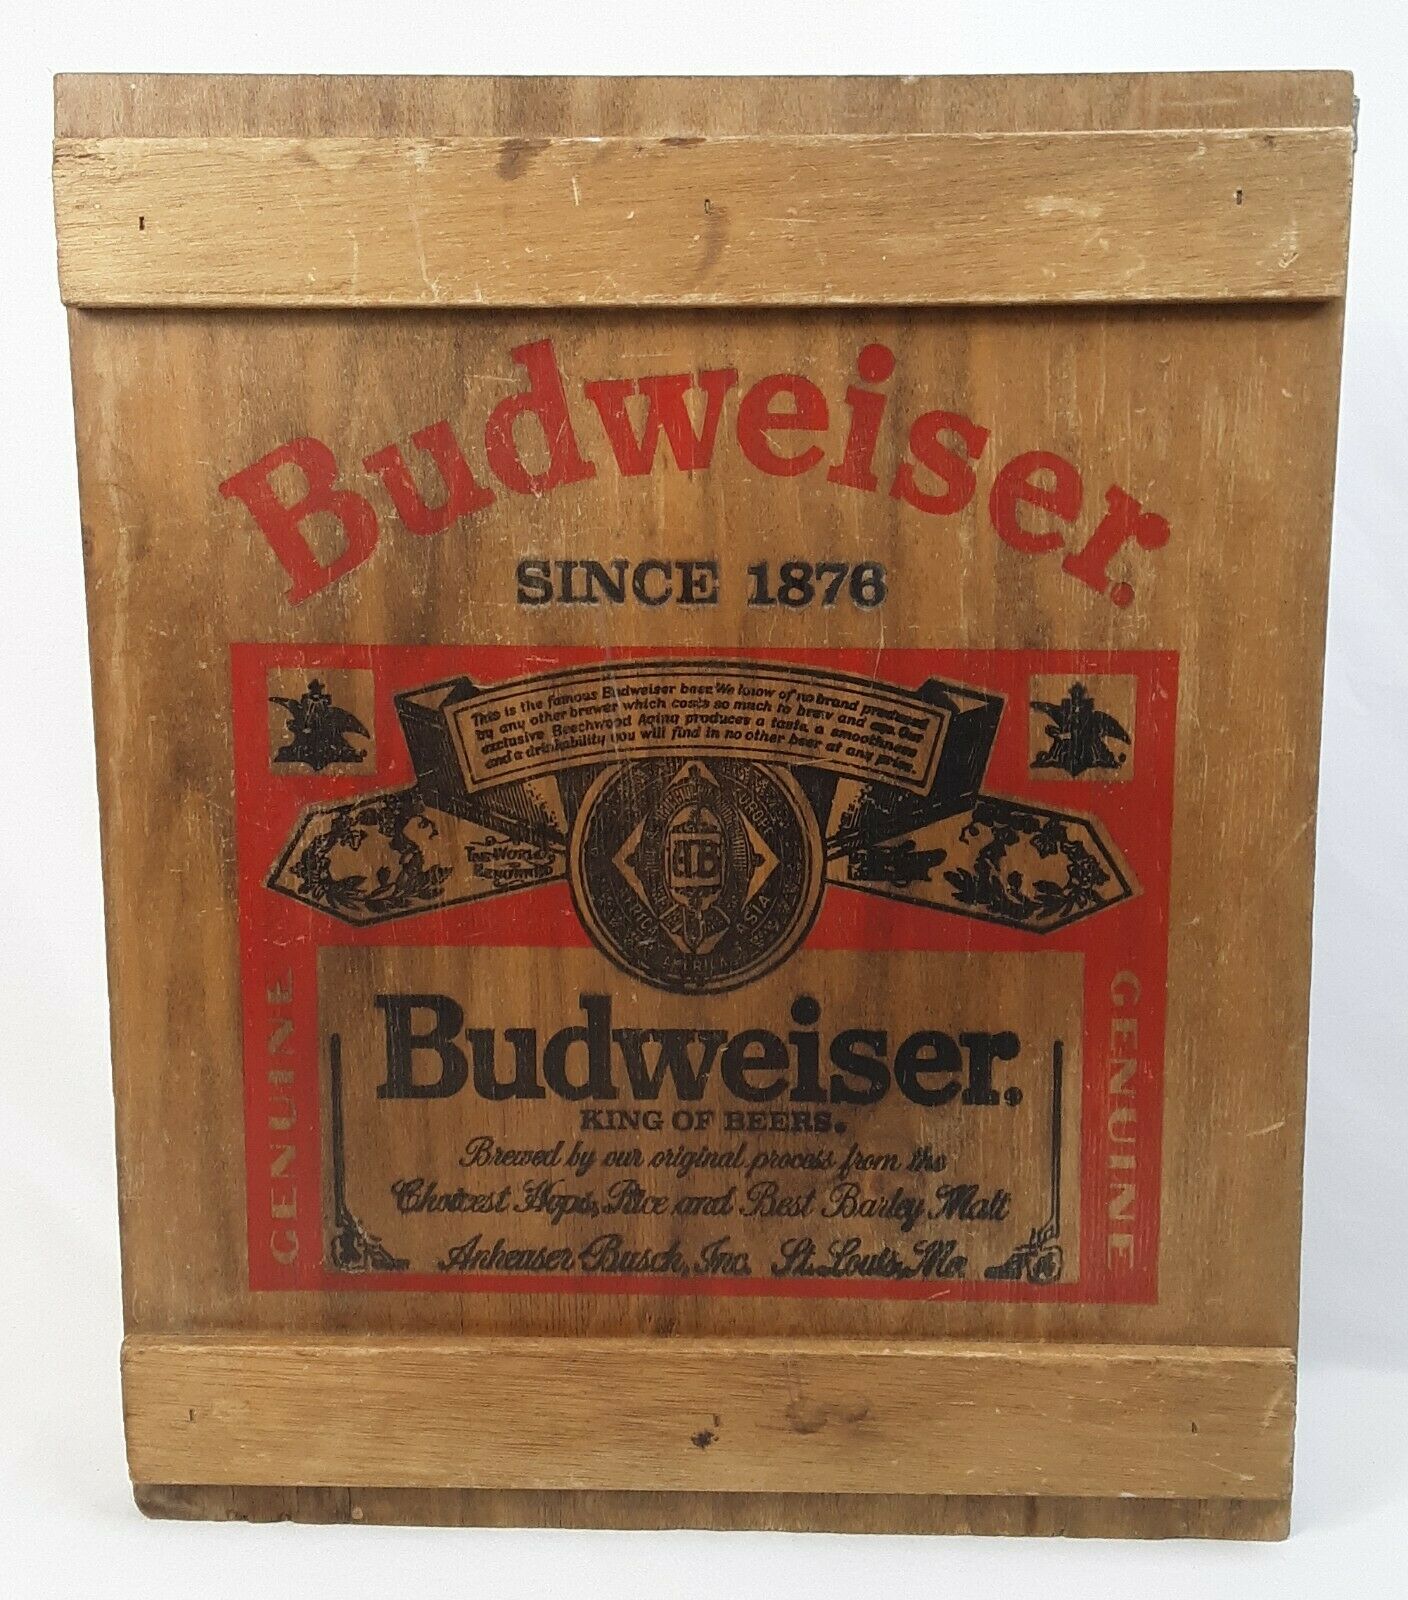 Rare Vintage Budweiser Wooden Display Box Solid Front Cover Handcrafted Man Cave